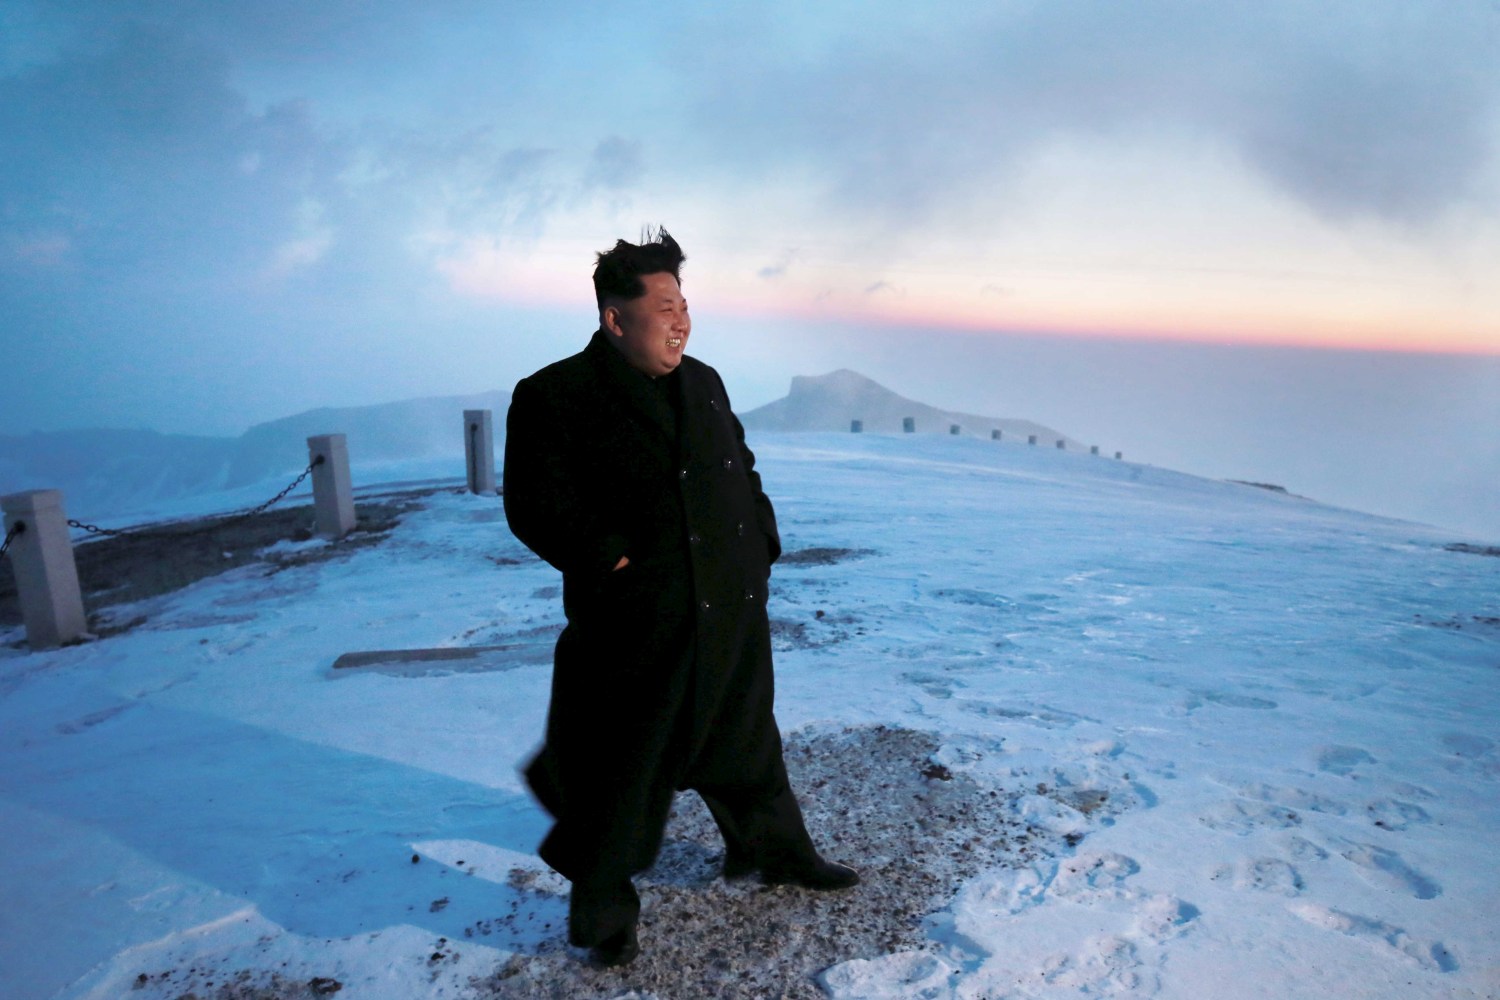 North Korean leader Kim Jong Un views the dawn from the summit of Mt Paektu April 18, 2015, in this photo released by North Korea's Korean Central News Agency (KCNA) on April 19, 2015. REUTERS/KCNA